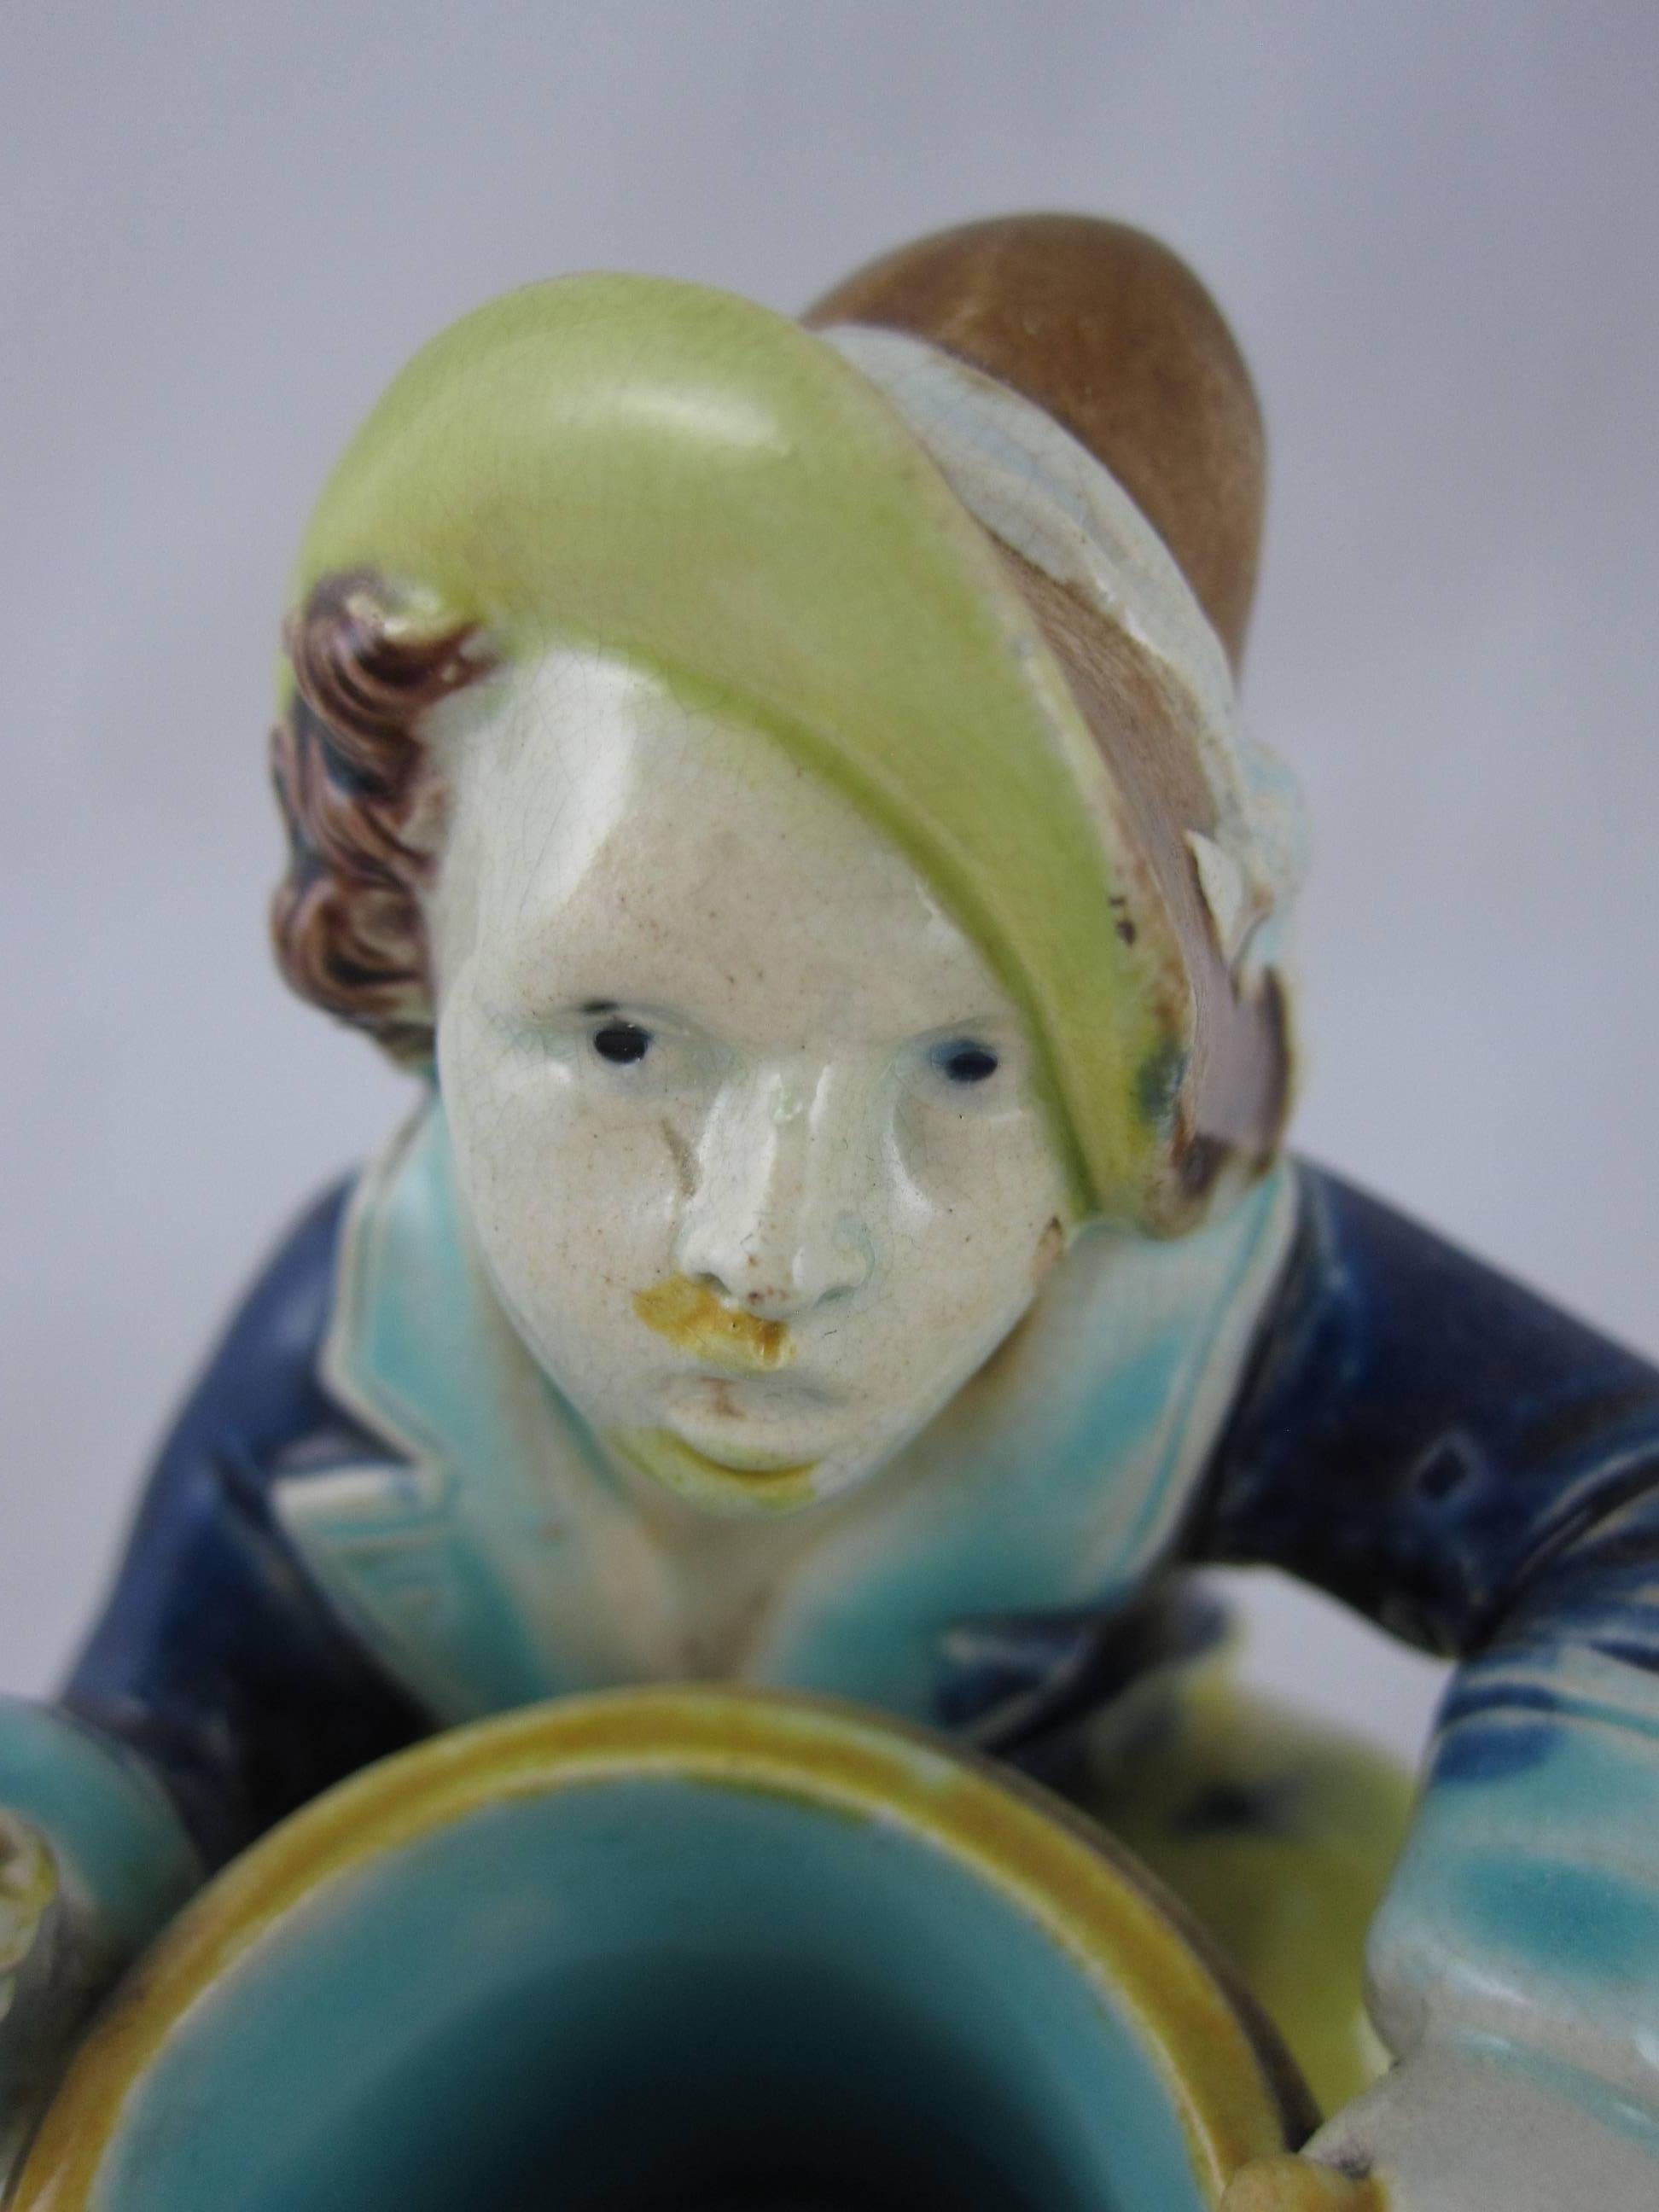 A rarer majolica figural match striker and holder, signed - Joseph Holdcroft, Staffordshire, England, circa 1835. 

The drummer boy figure is in period dress, the drum serves as the match holder, the tread on the underside of the boy’s left boot is